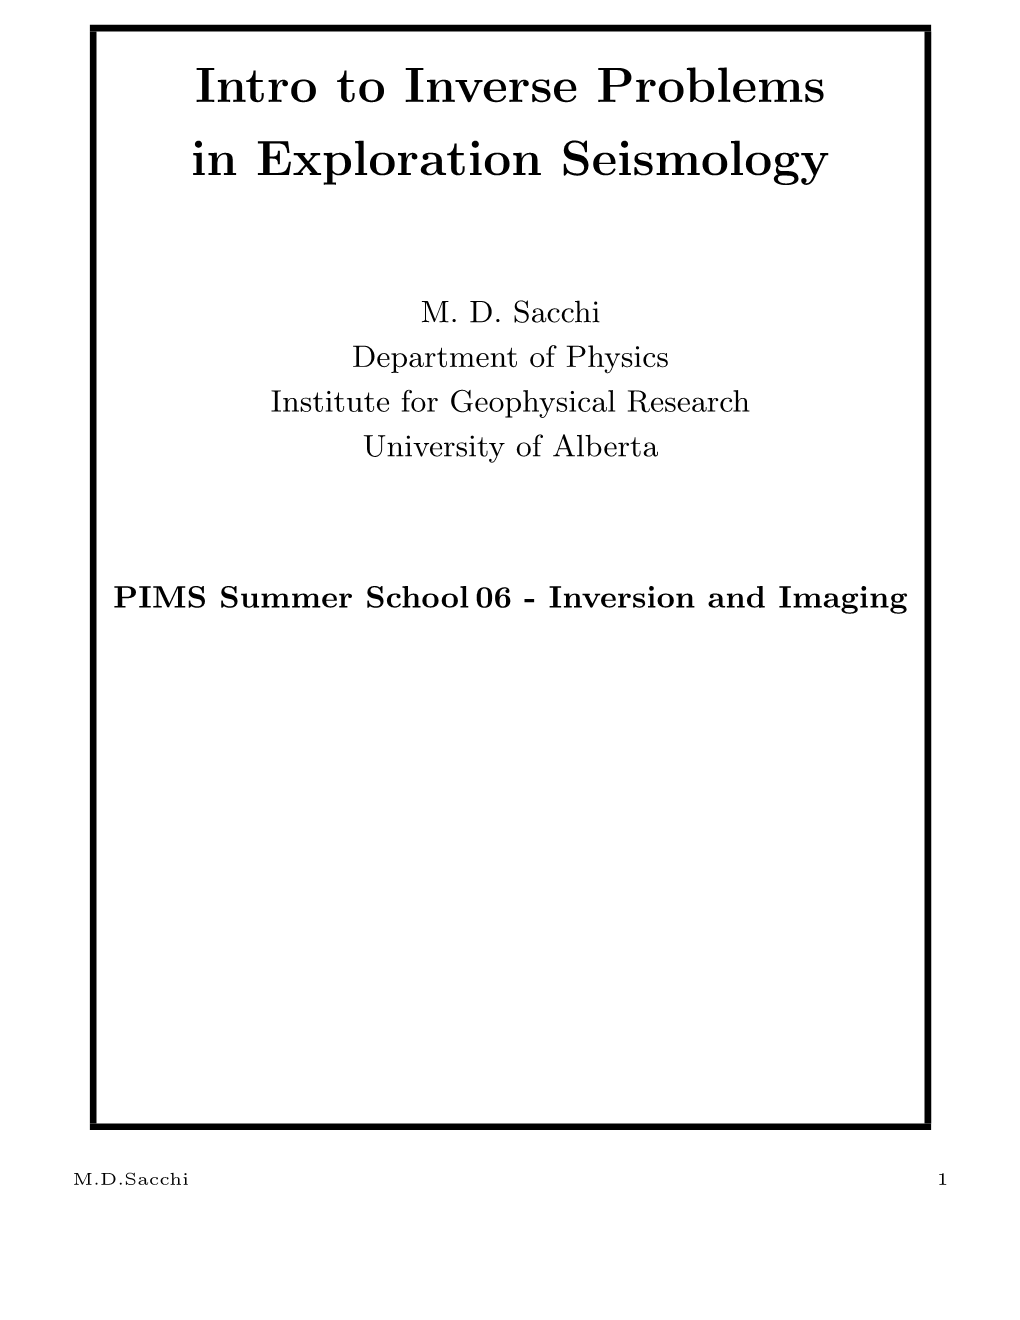 Intro to Inverse Problems in Exploration Seismology